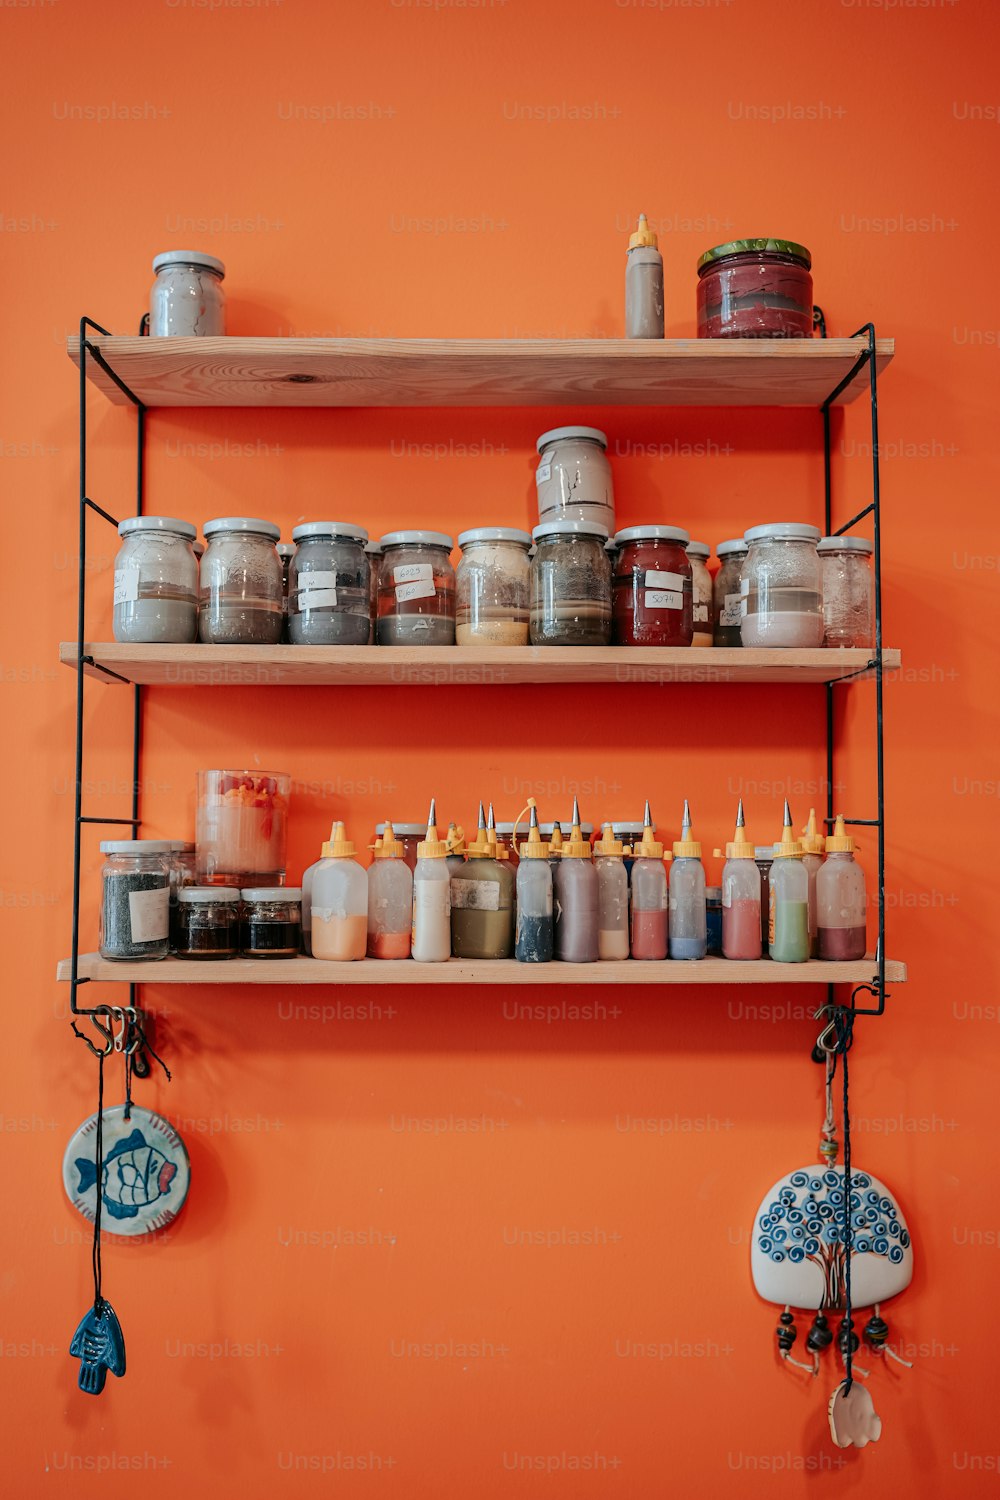 a couple of shelves that have some jars on them